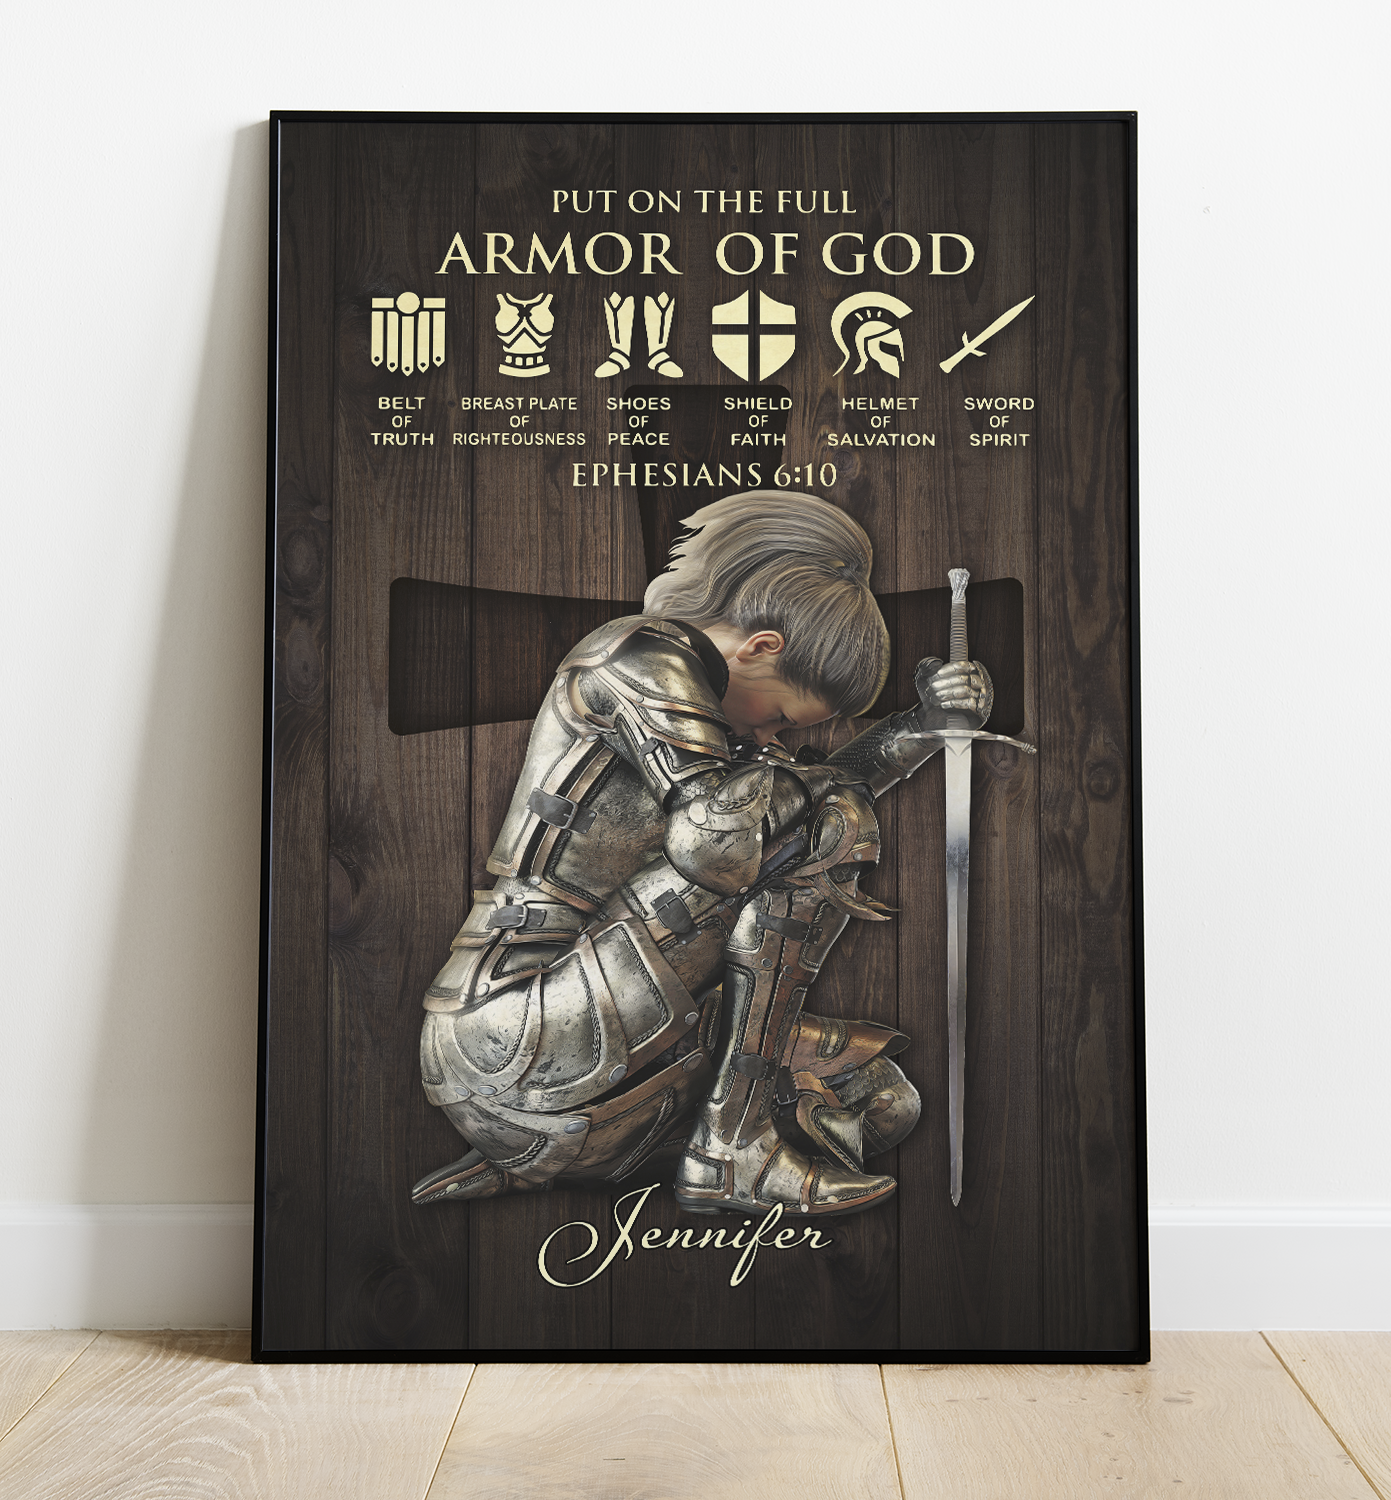 Personalized Woman Warrior of God Put On The Full Armor of God Ephesians 6:10 Poster